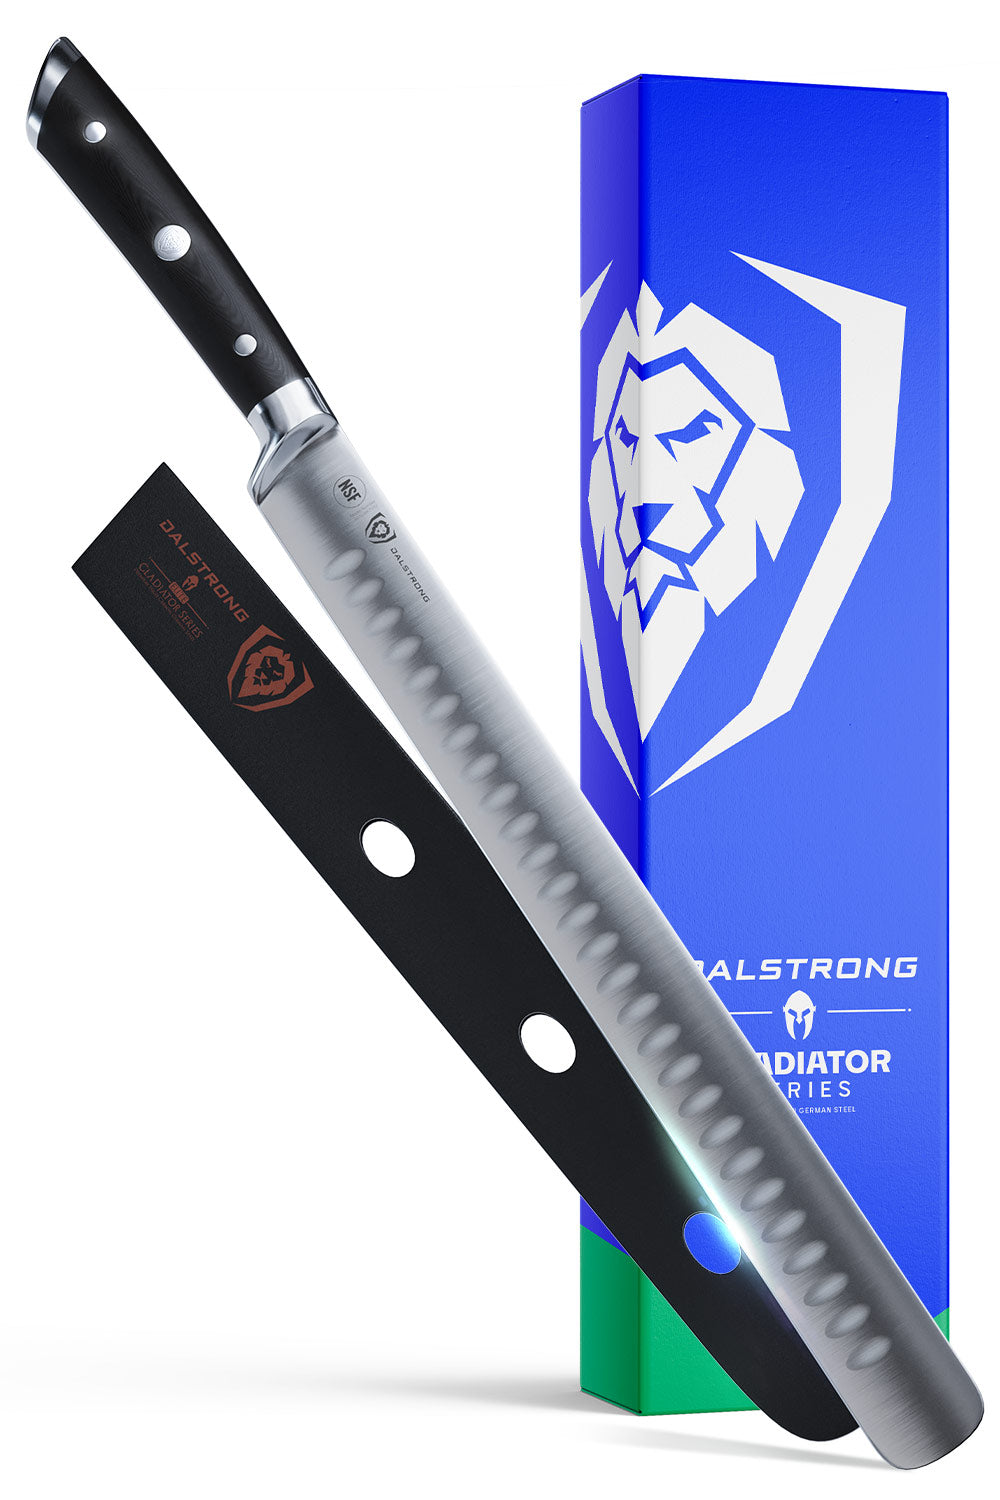 Dalstrong gladiator series 12 inch slicer knife with black handle in front of it's premium packaging.